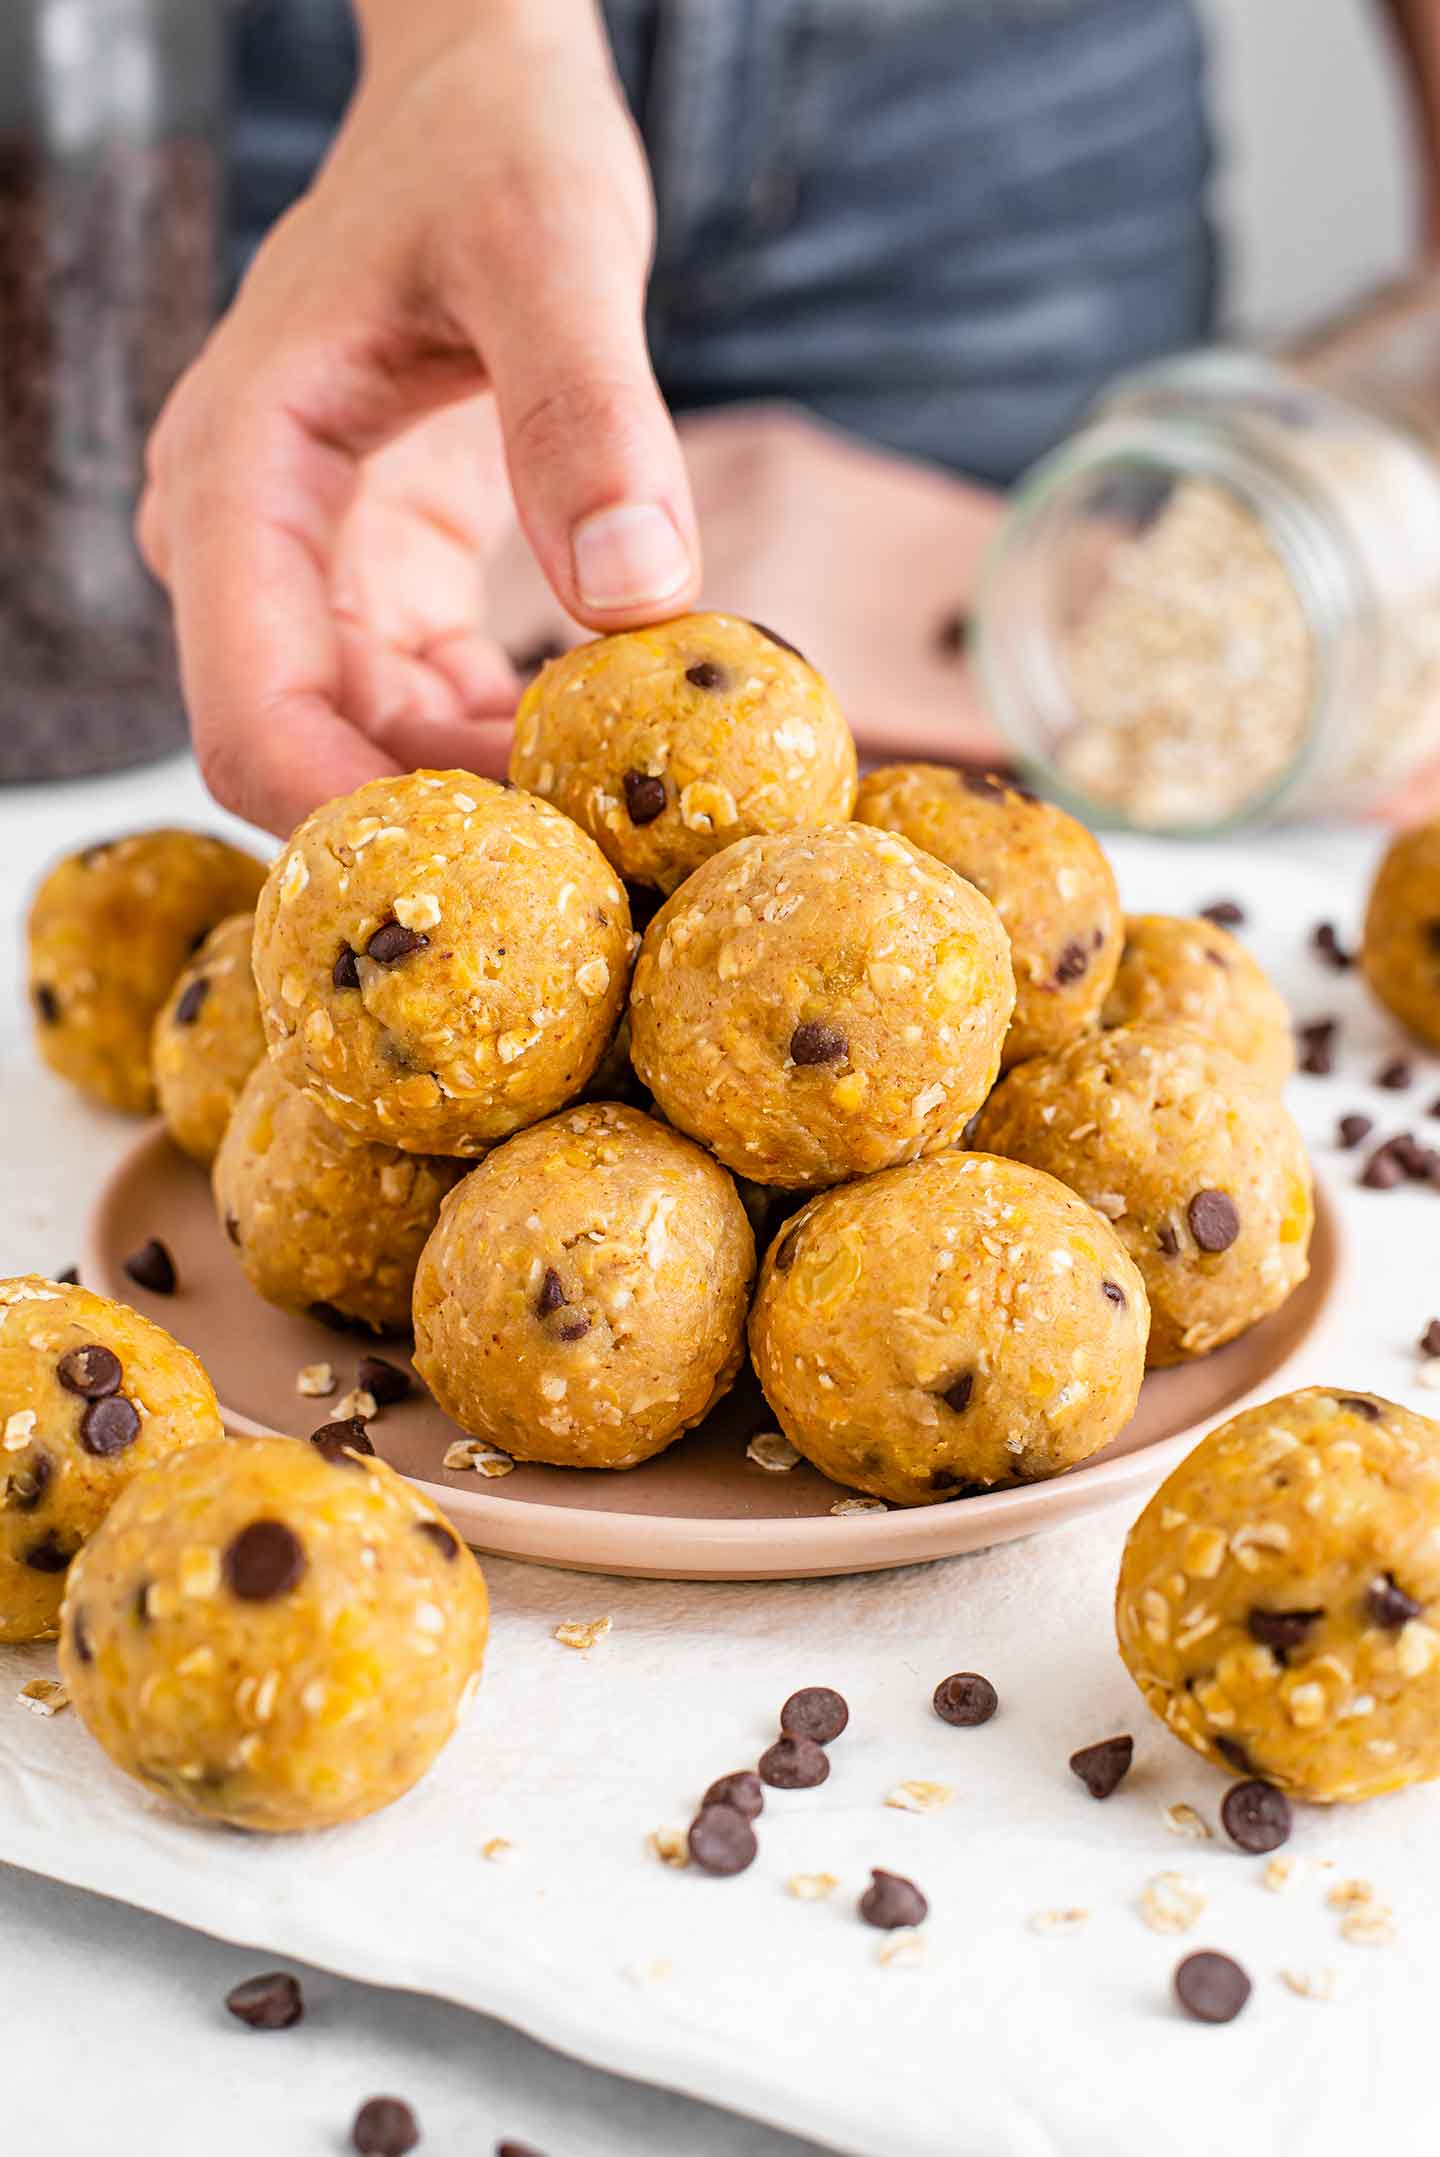 Pb chickpea protein balls are stacked high on a plate. A hand grabs the top ball from the stack. The balls are speckled with chocolate chips and pieces of oats are visible.